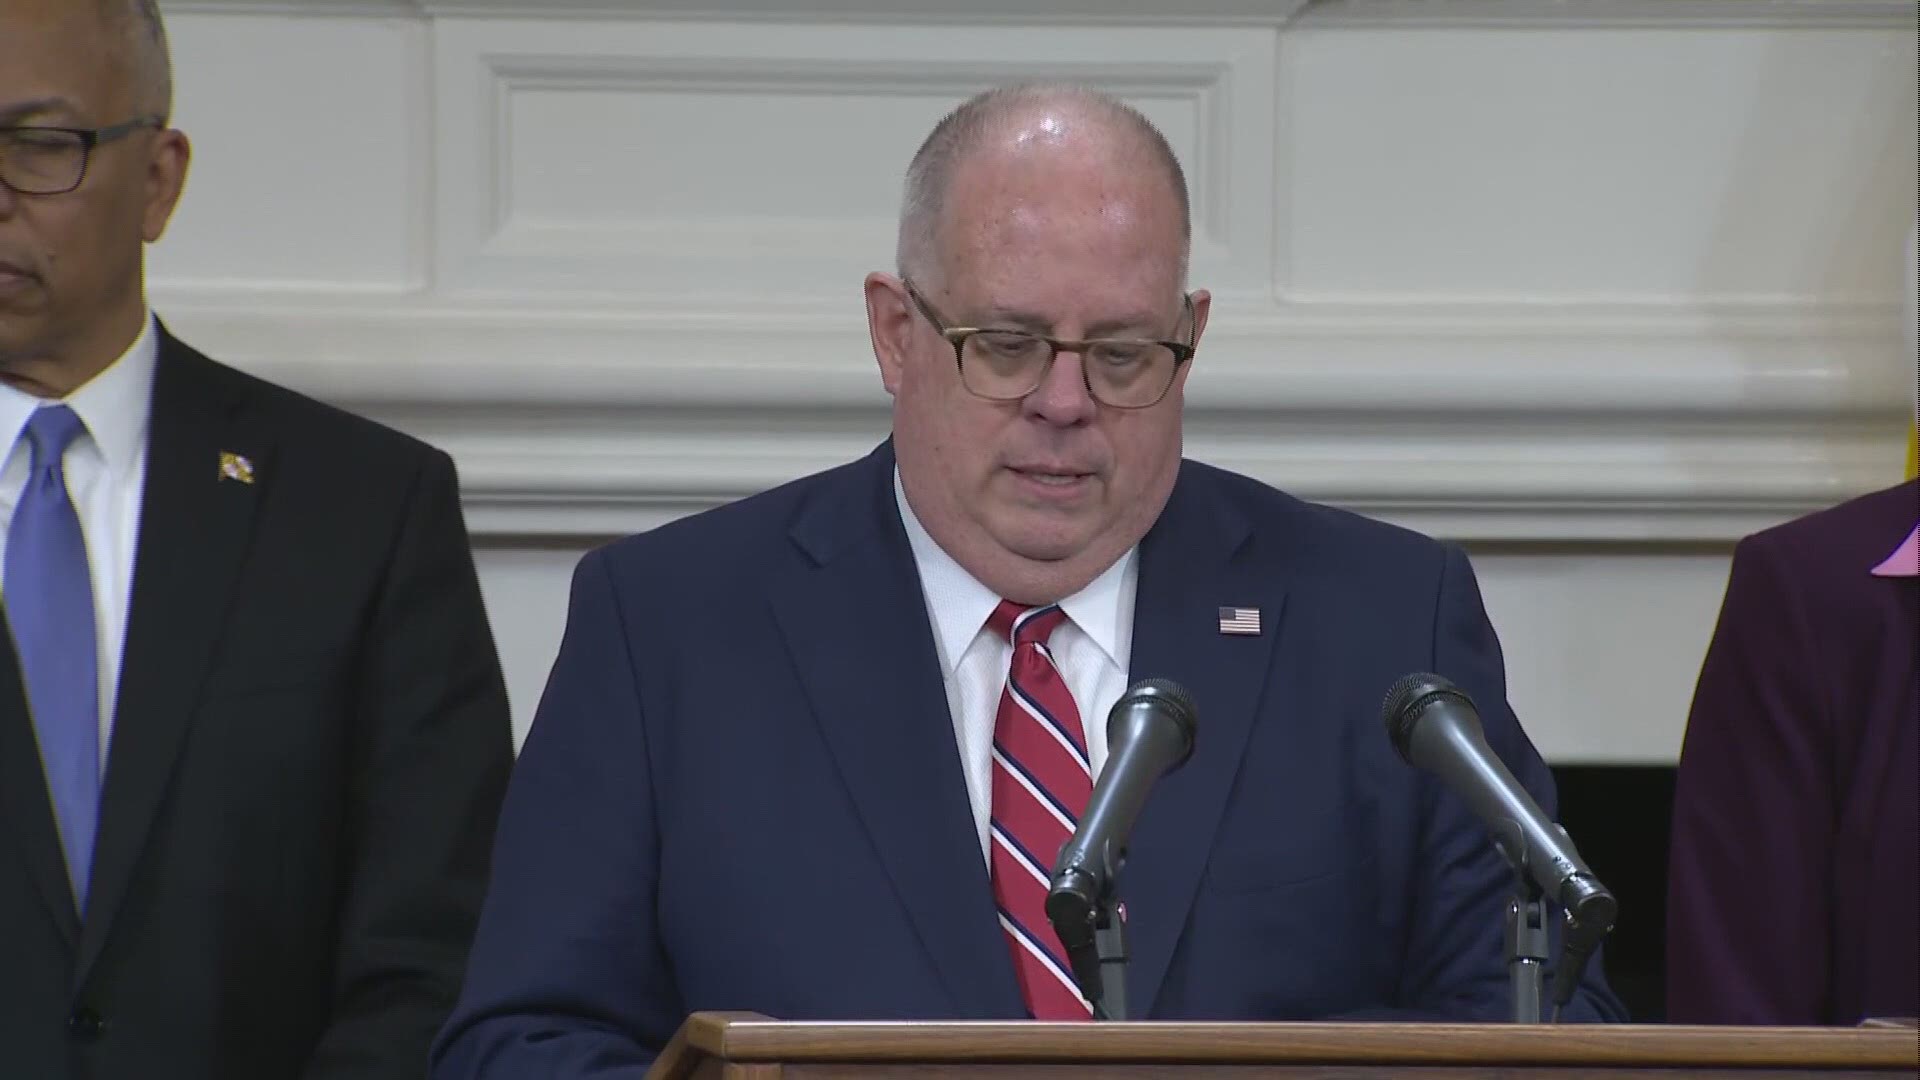 Gov. Larry Hogan declared a state of emergency in Maryland Thursday evening. He said all three patients are currently in good condition.